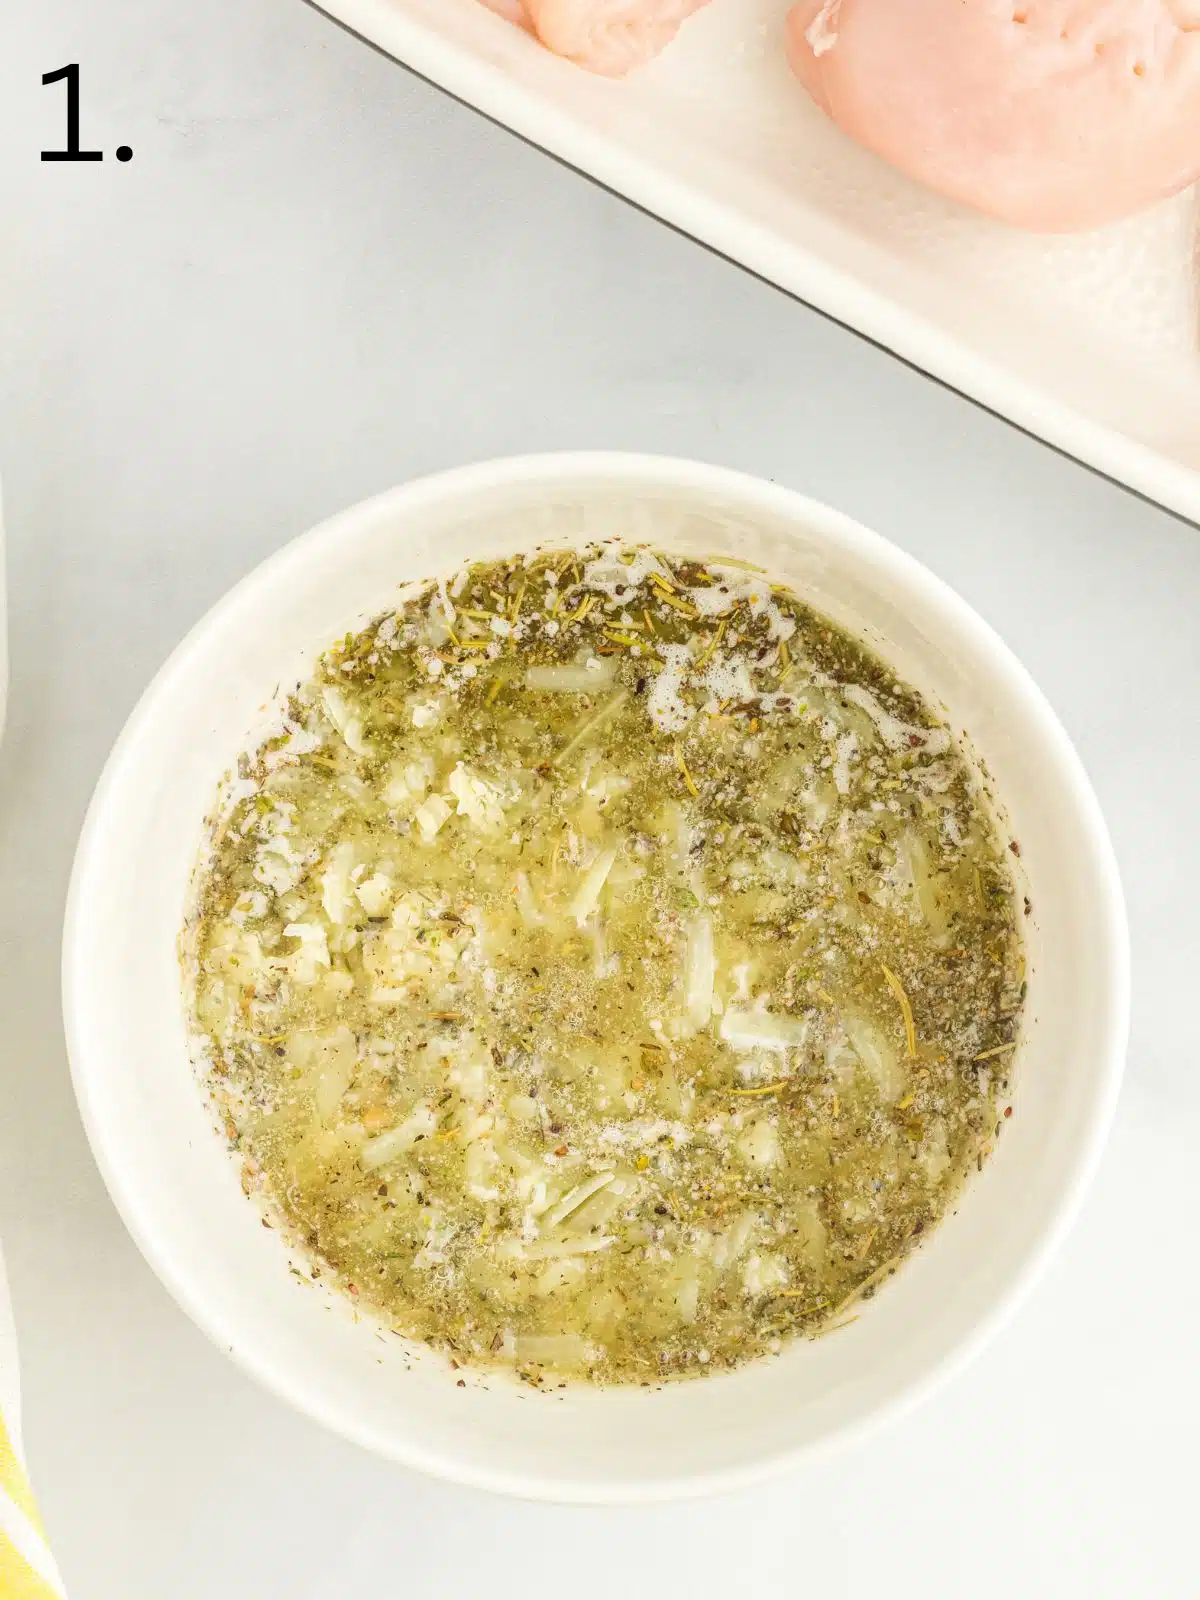 melted butter with herbs and garlic in small white bowl.